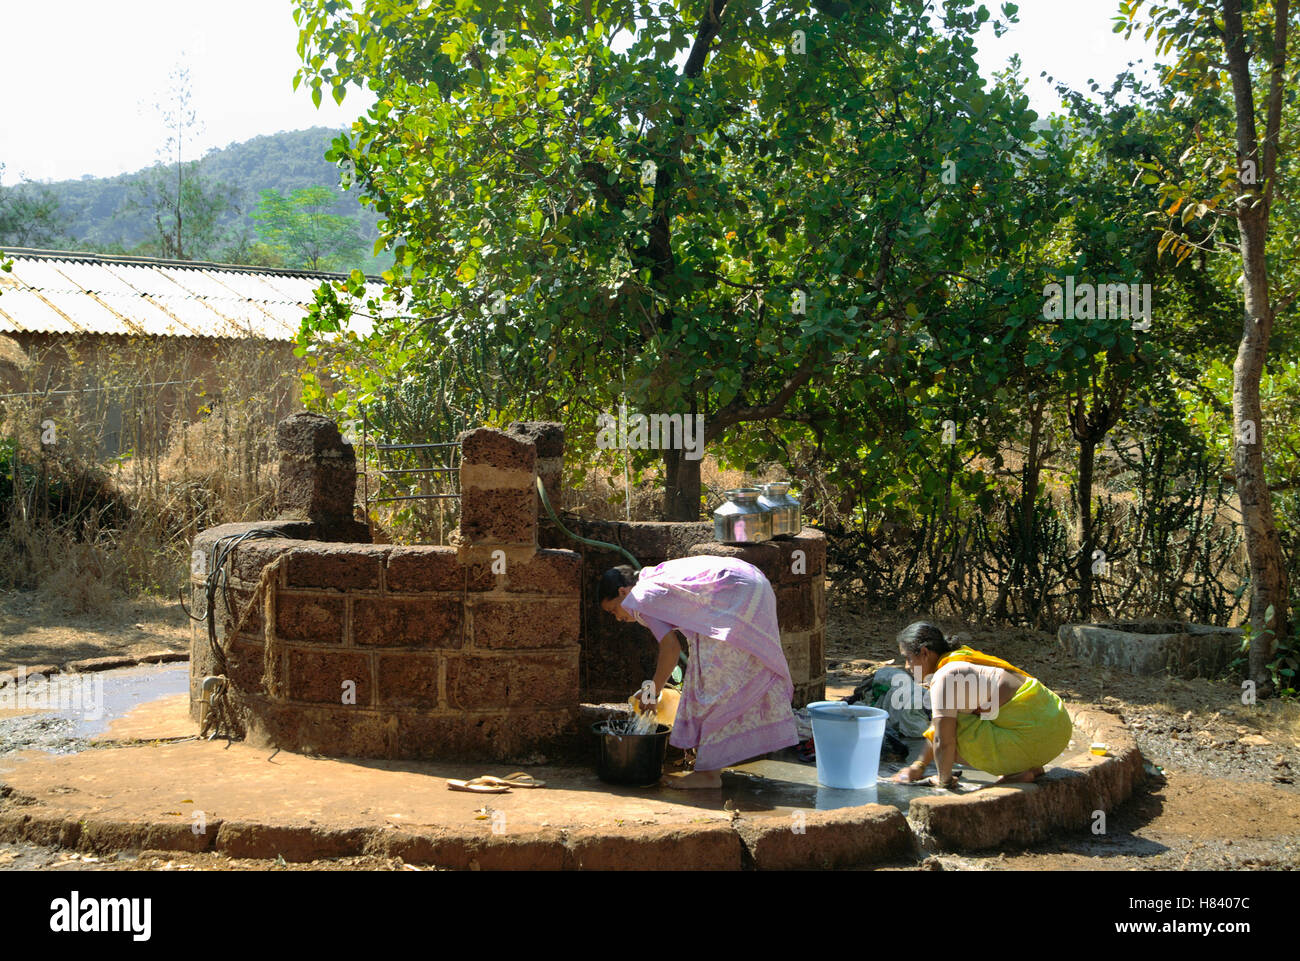 Villagers doing household work near the well. Stock Photo